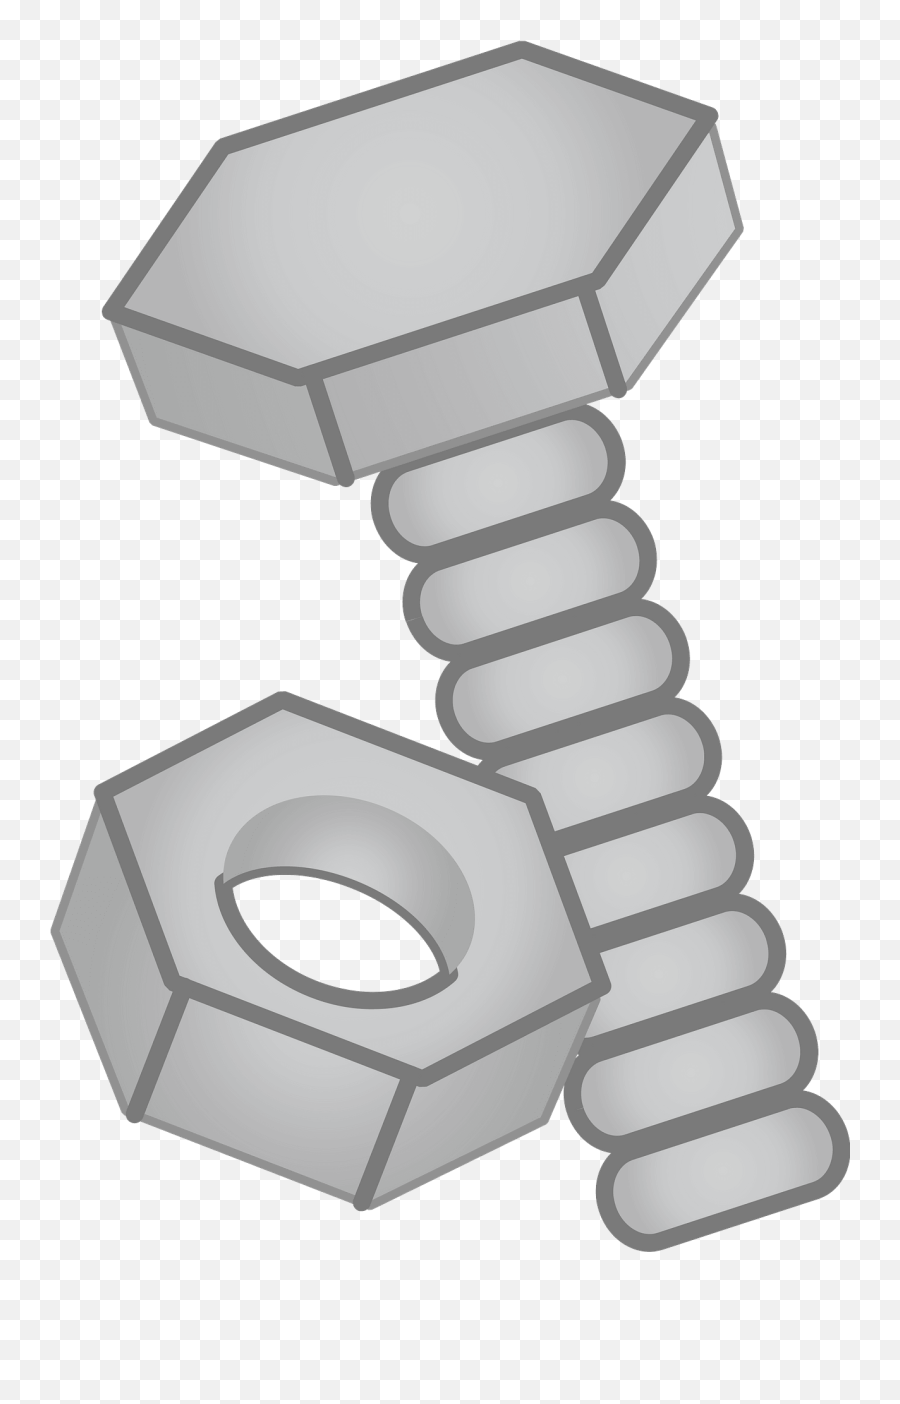 Bolt And Nut Clipart Free Download Transparent Png Creazilla - Nut Bolt Clipart,Nut Bolt Icon